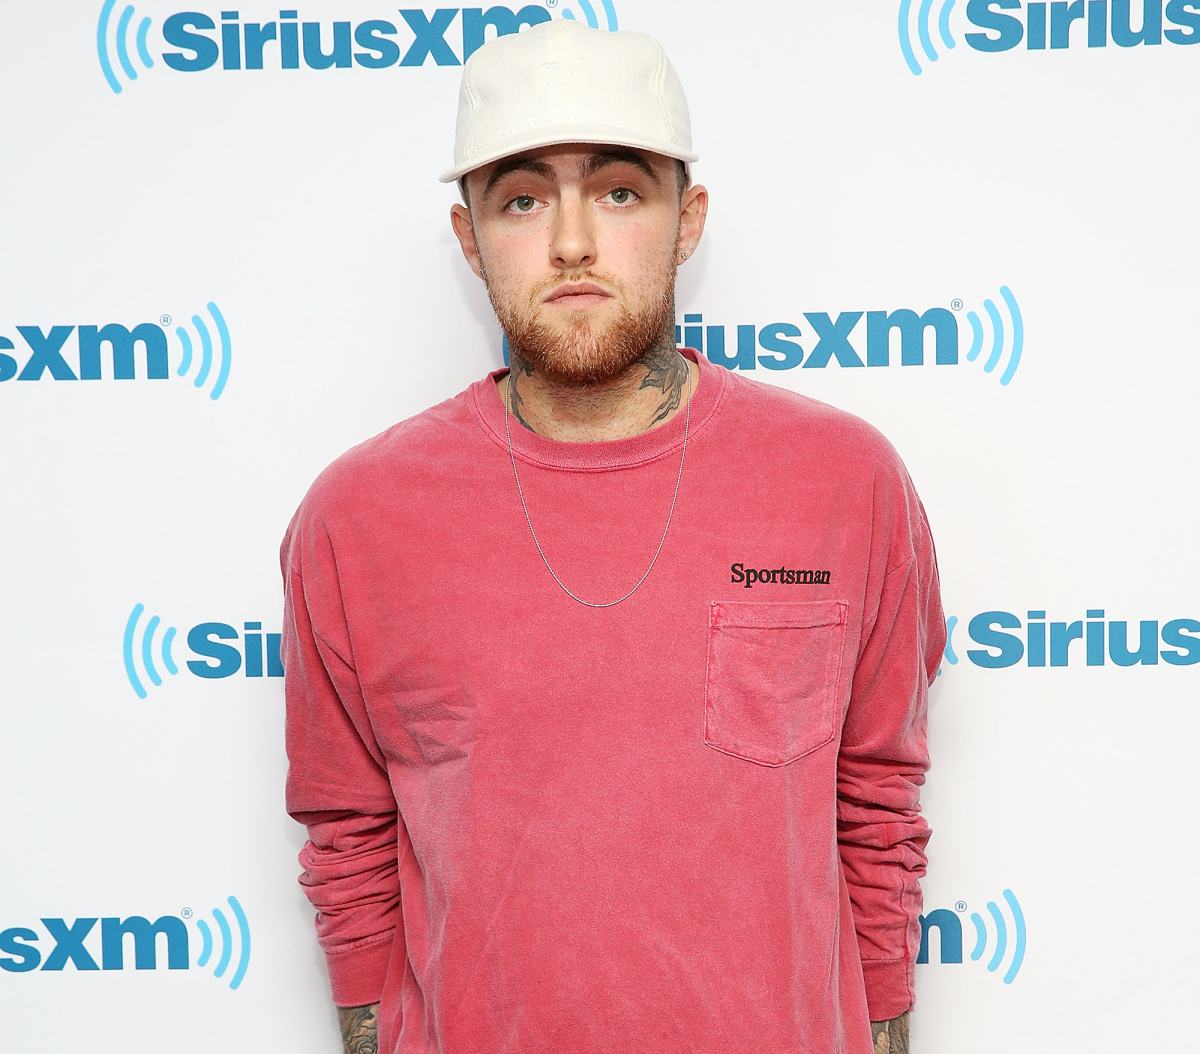 Rapper Mac Miller has died at age 26, family says - ABC7 New York